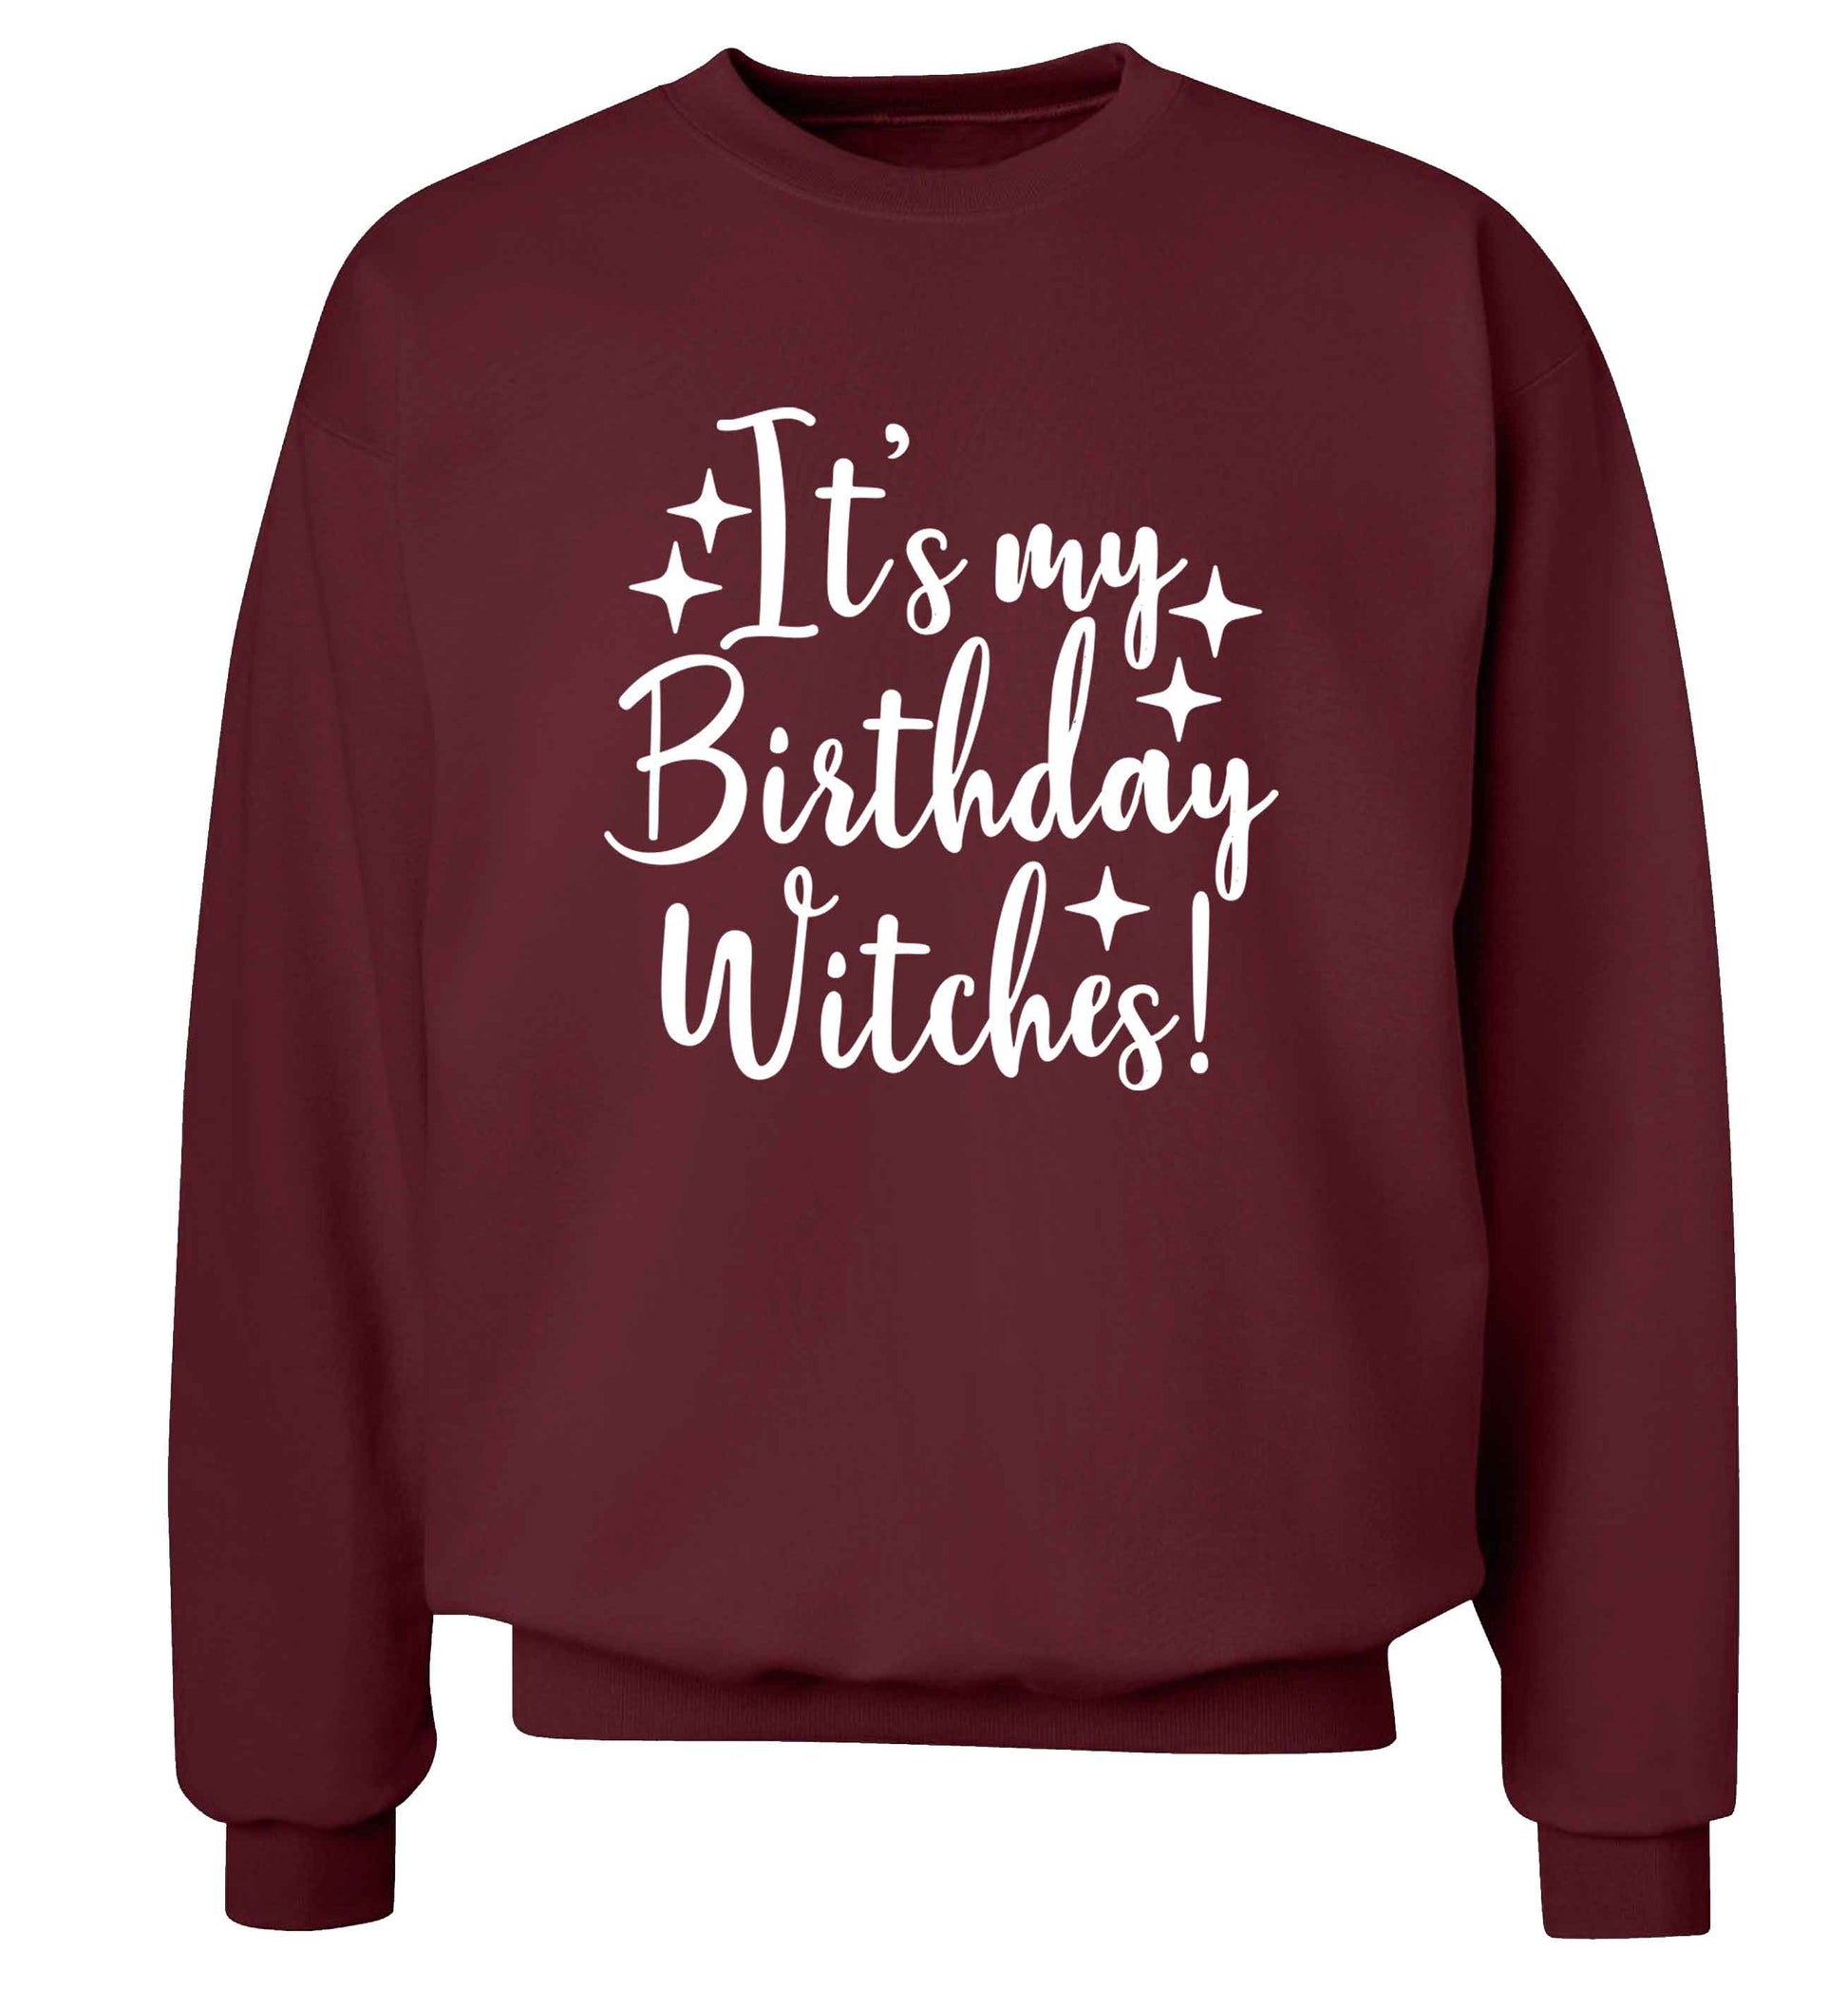 It's my birthday witches!adult's unisex maroon sweater 2XL